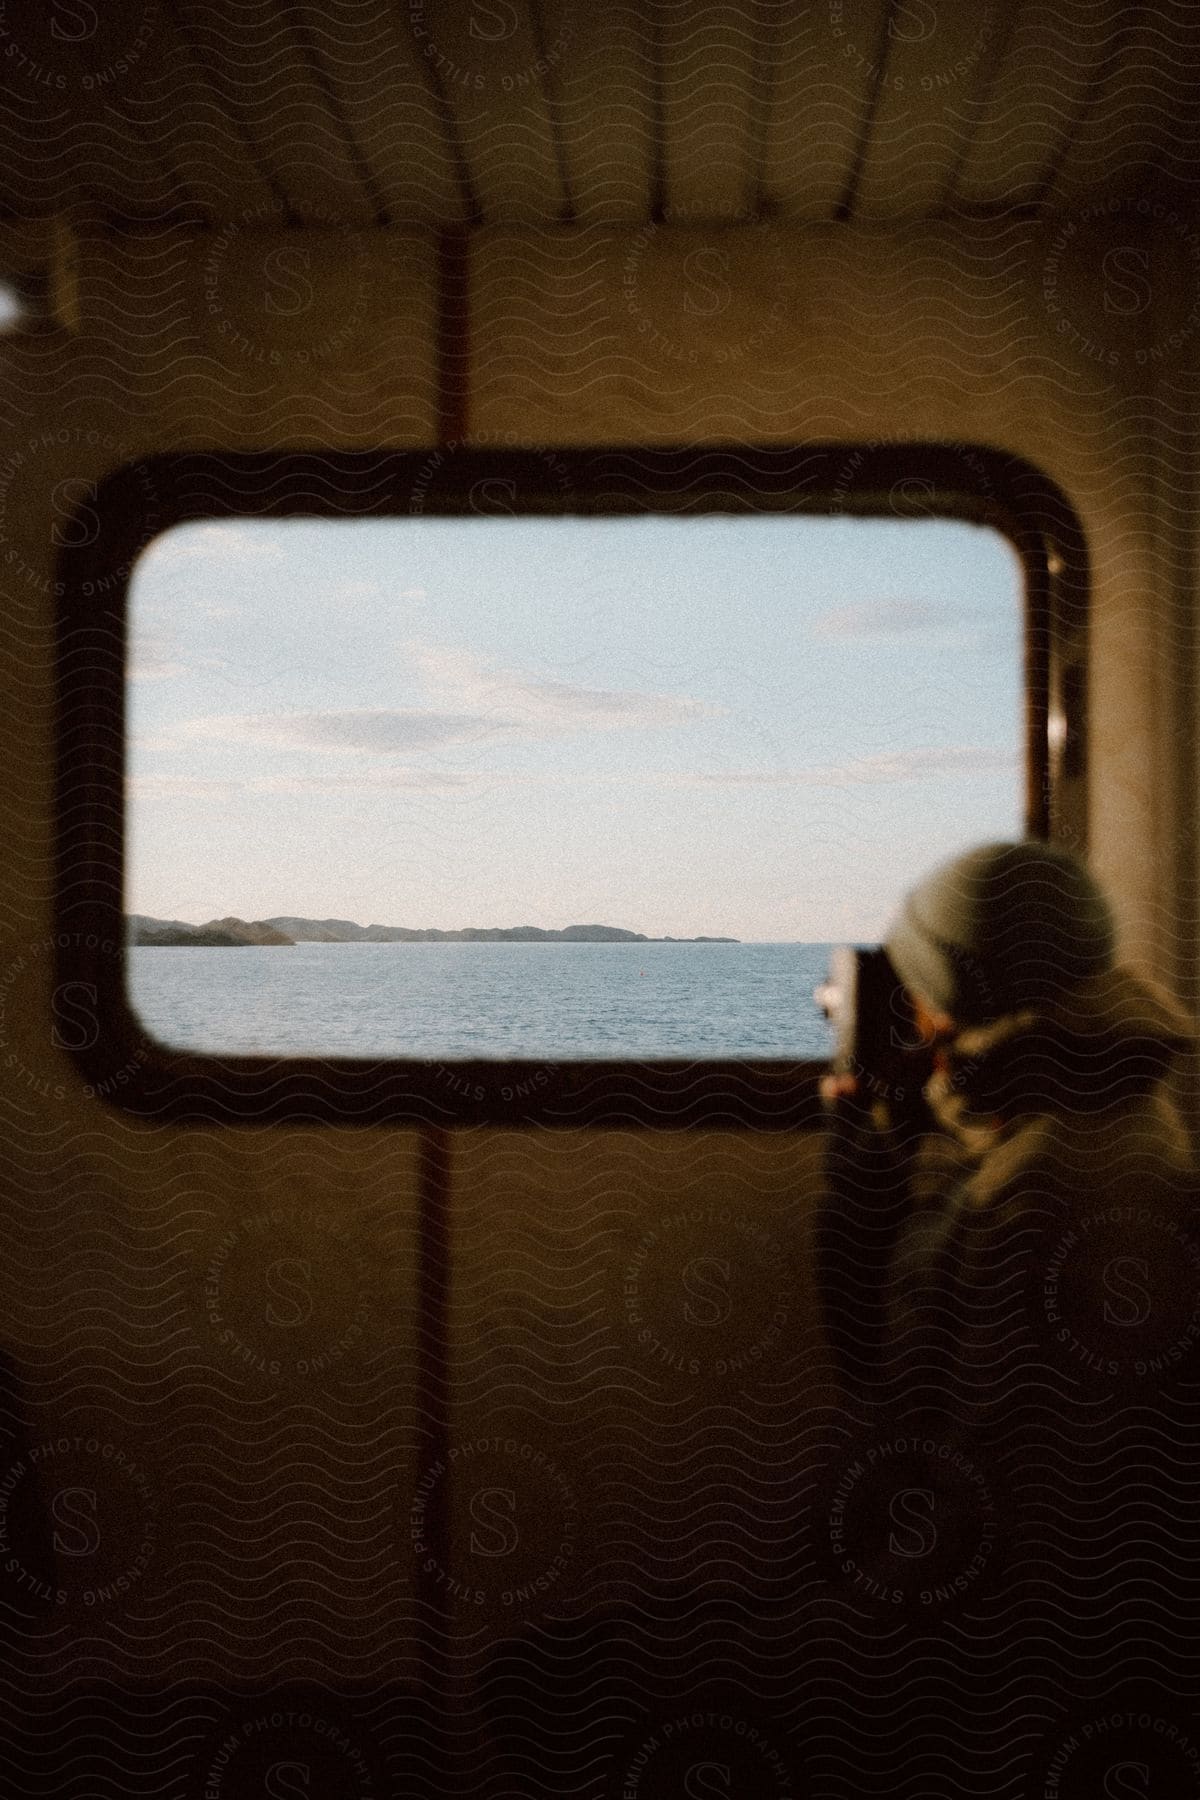 Winter-clad photographer captures a timeless vista of water through a boat window, using a vintage film camera.